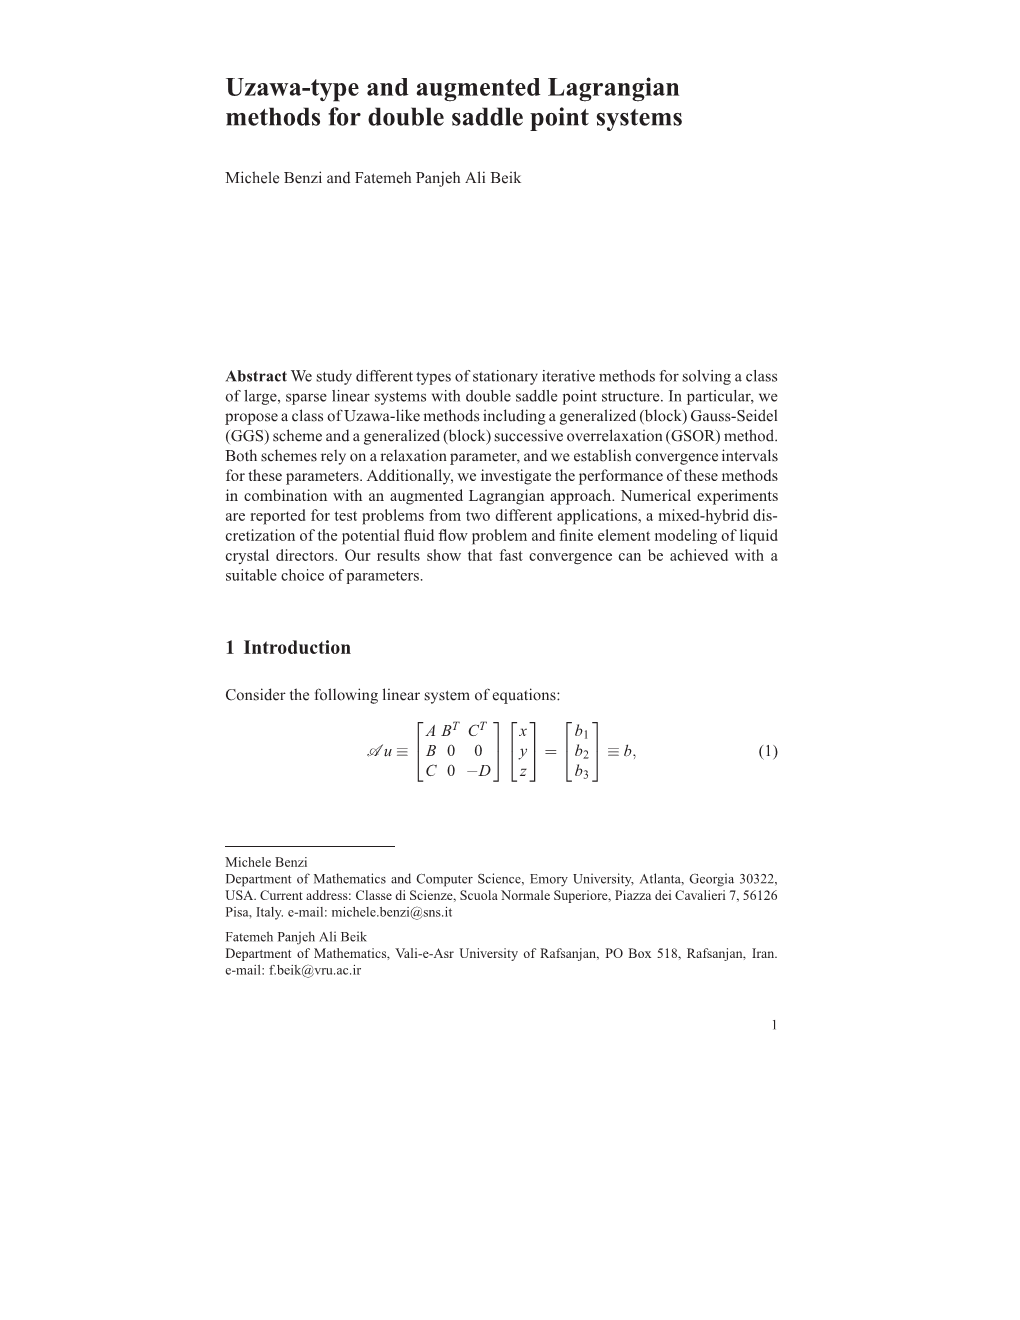 Uzawa-Type and Augmented Lagrangian Methods for Double Saddle Point Systems